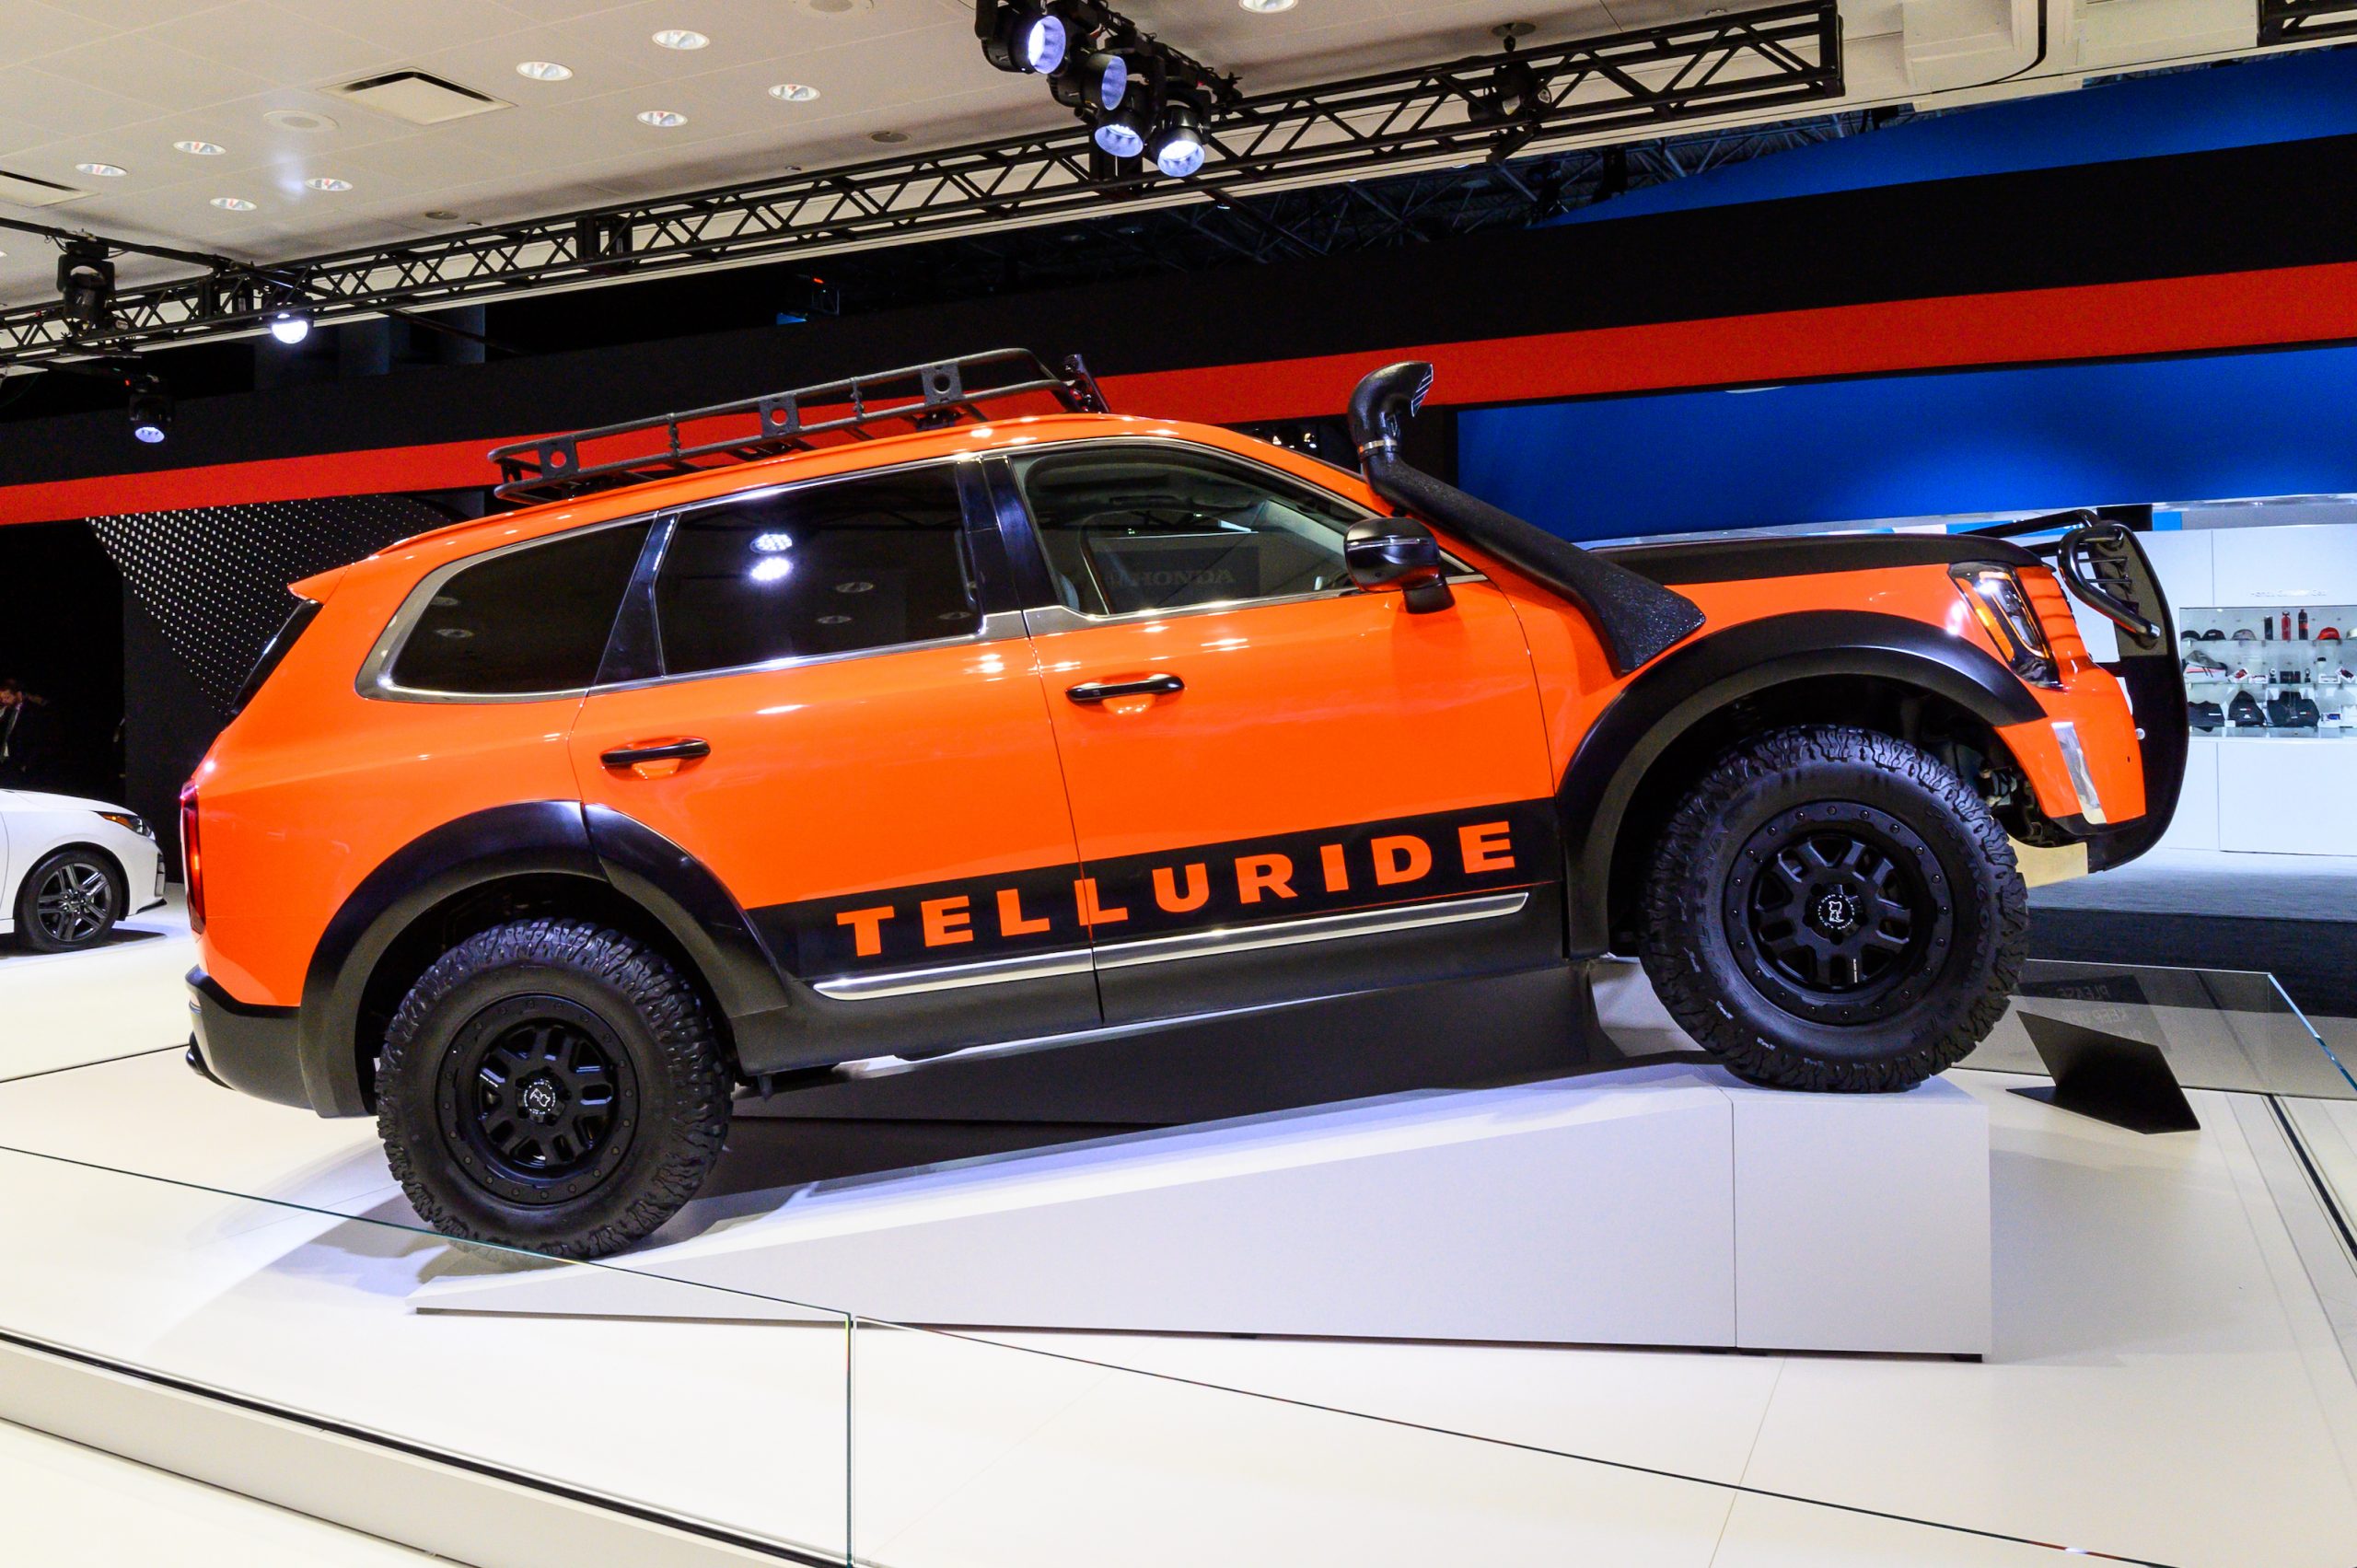 Orange Kia Telluride with roof rack seen at the New York International Auto Show at the Jacob K. Javits Convention Center in New York